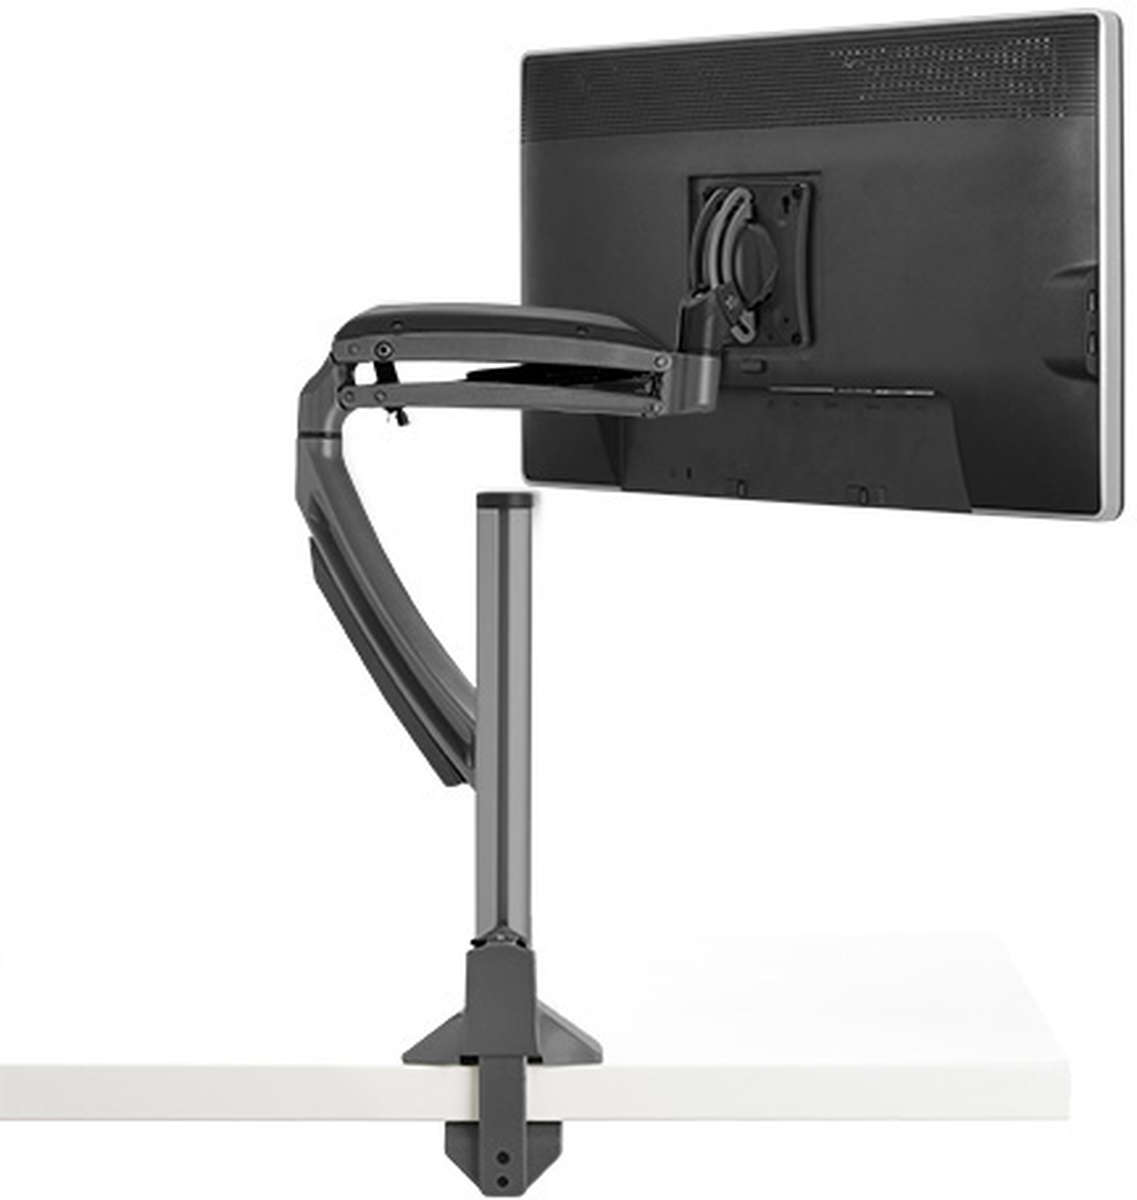 Chief K1C120B Kontour single monitor twin arm desk mount finished in black product image. Click to enlarge.